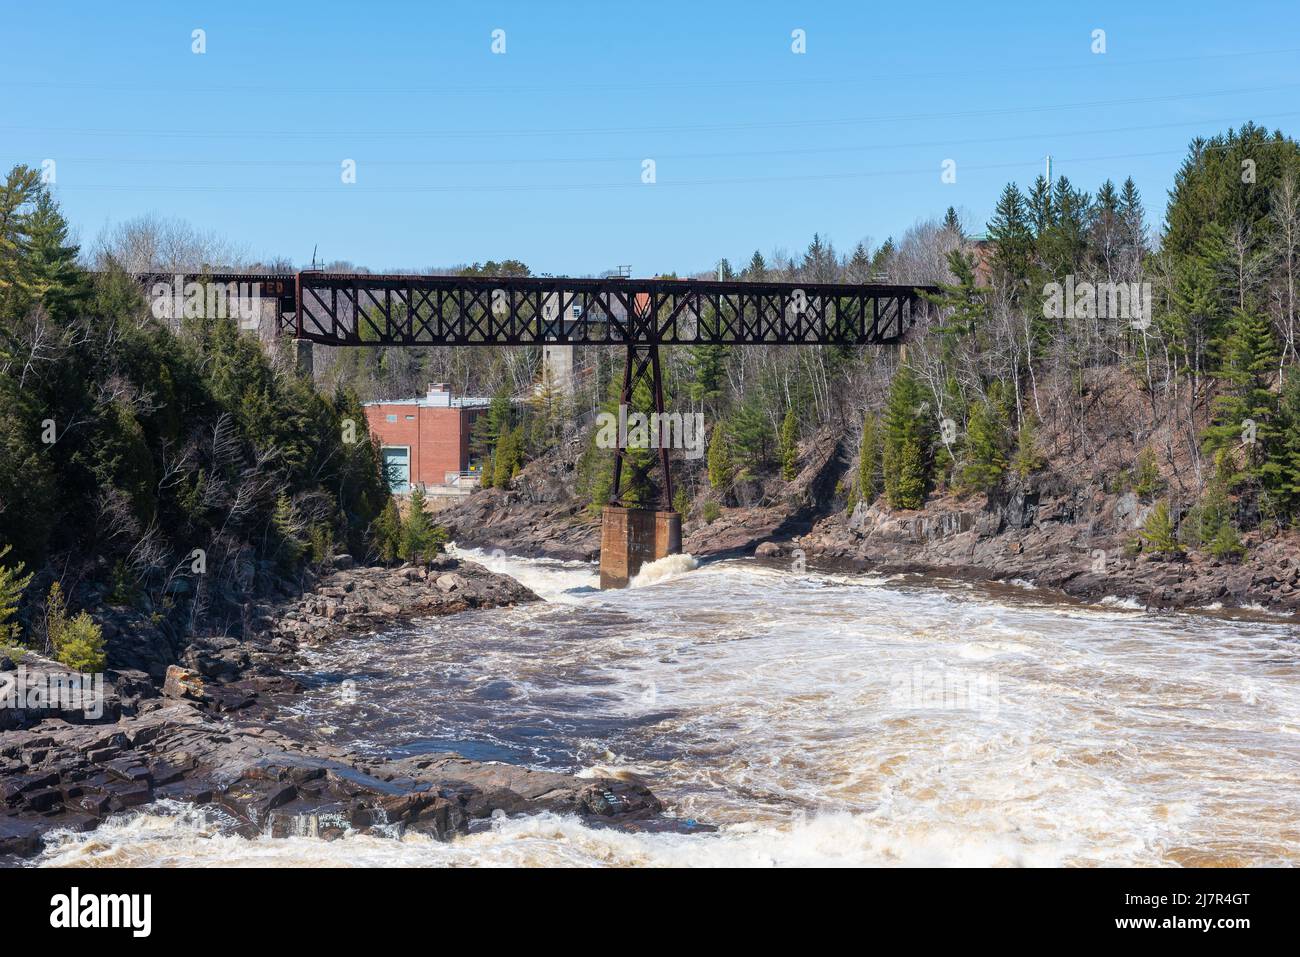 The St Maurice river at the Shawinigan devil’s hole during the spring, Quebec, Canada Stock Photo